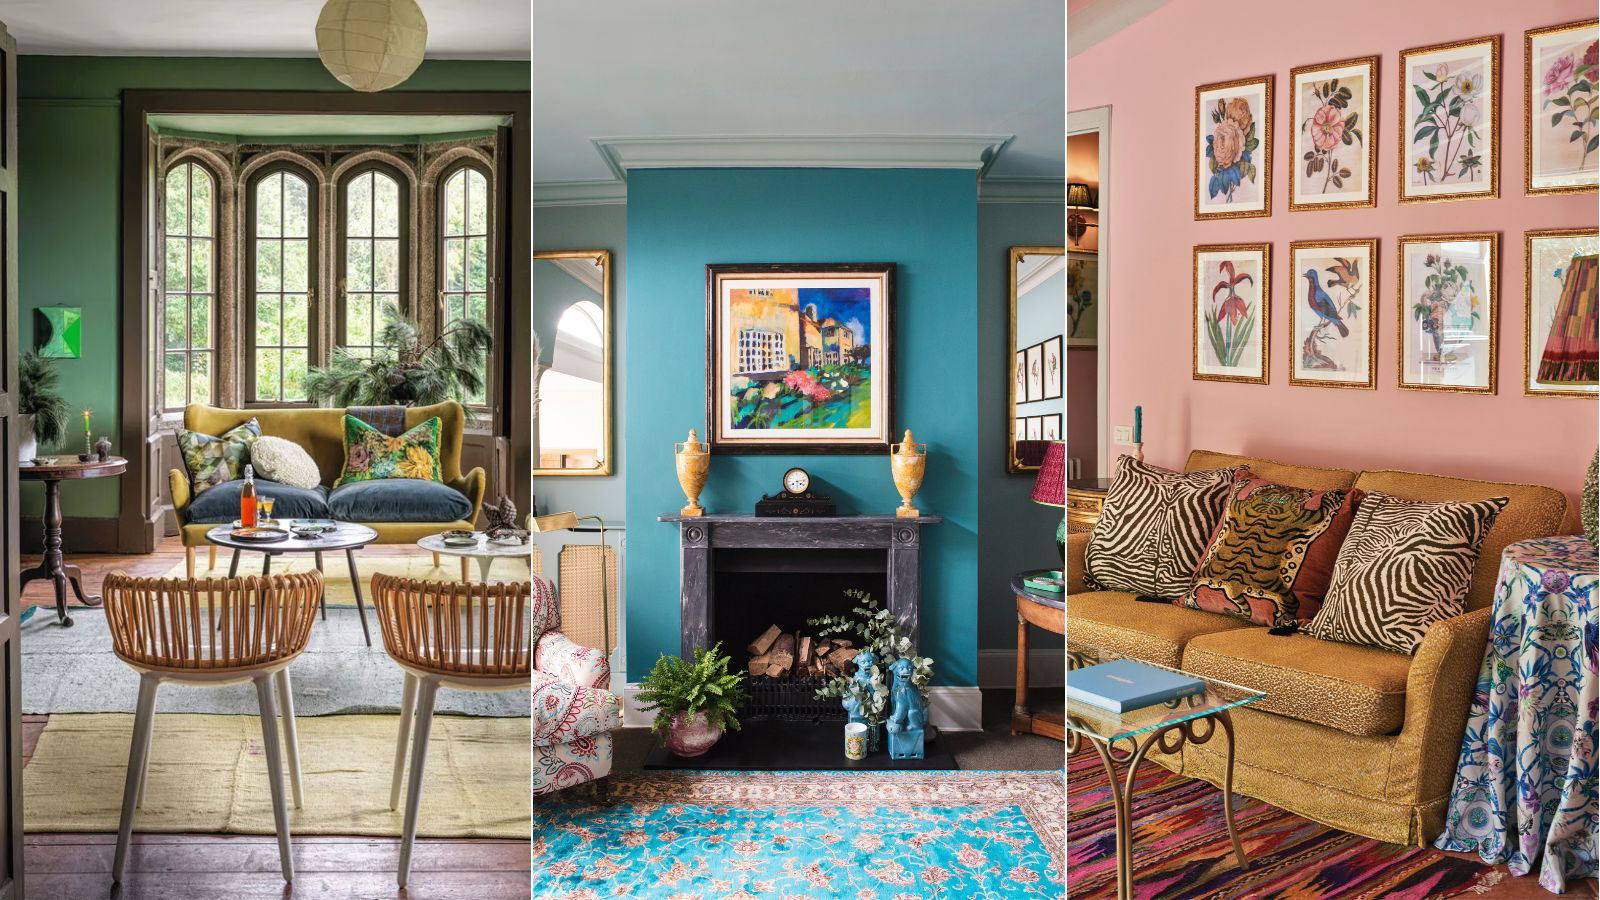 How do you design a maximalist living room that feels playful but still ...